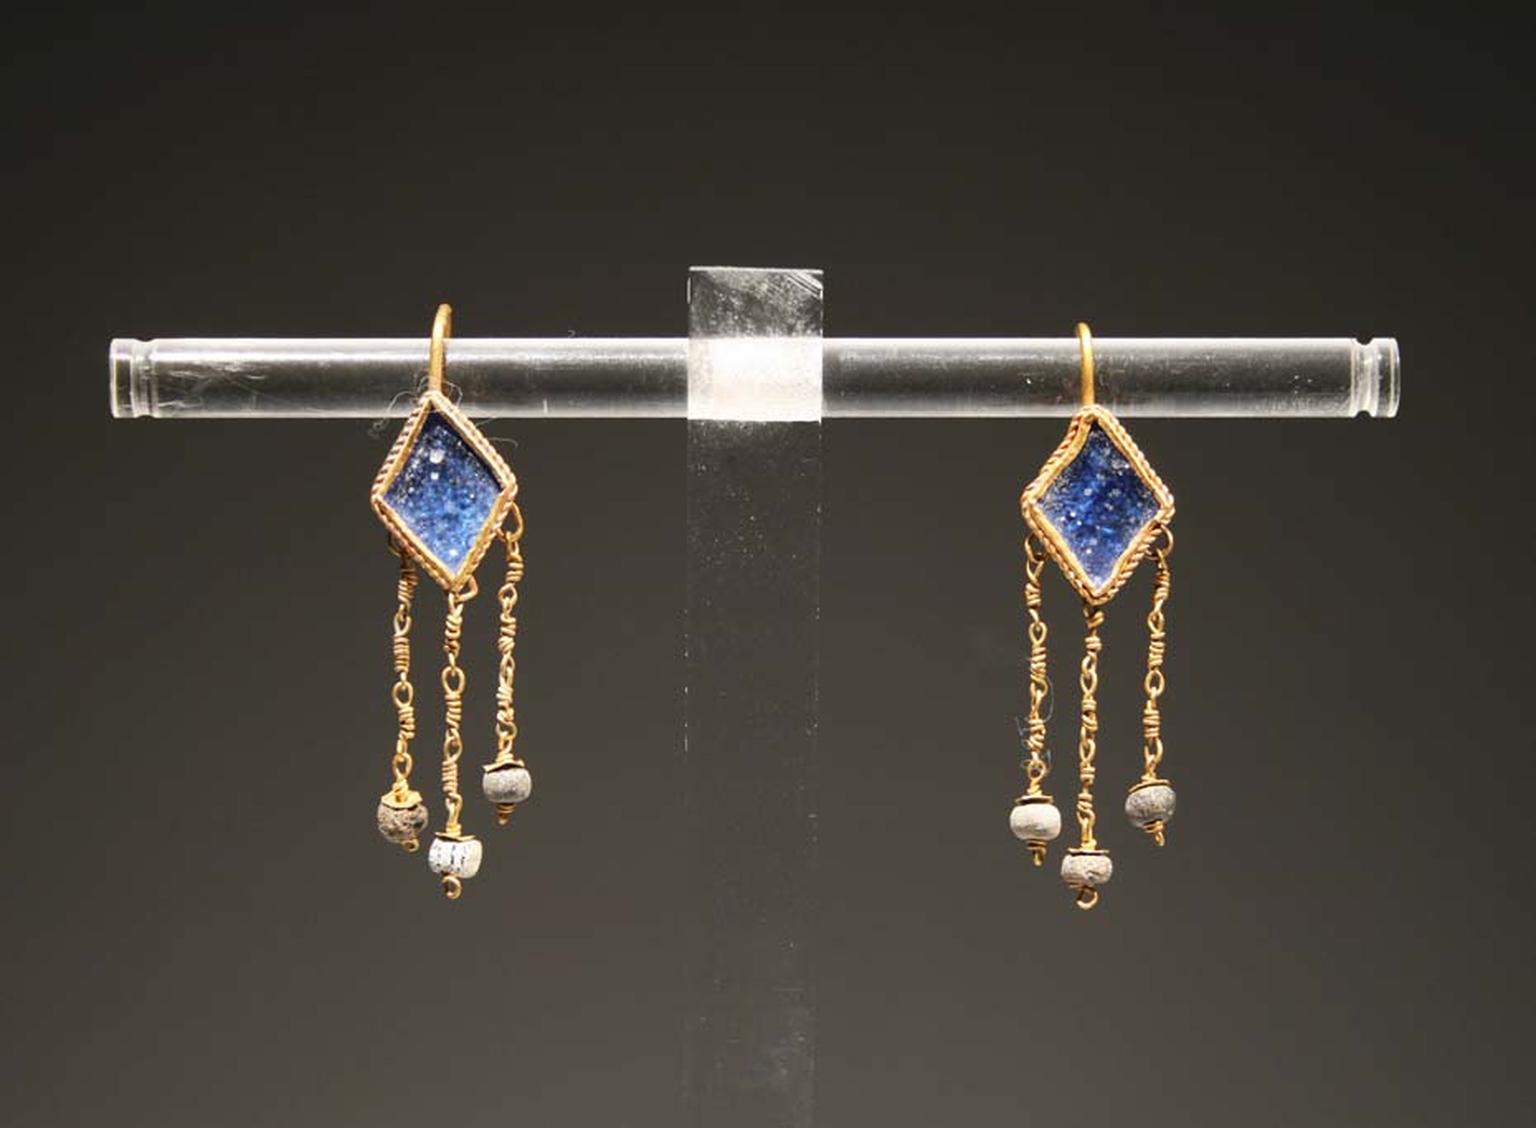 Antiquities dealer Jean-David Kahn, whose sculptures can sell for seven figures, is selling several lovely, affordable jewels at TEFAF, among them a pair of Roman blue glass, angle earrings made between the 1st and 3rd centuries AD at €3,500.